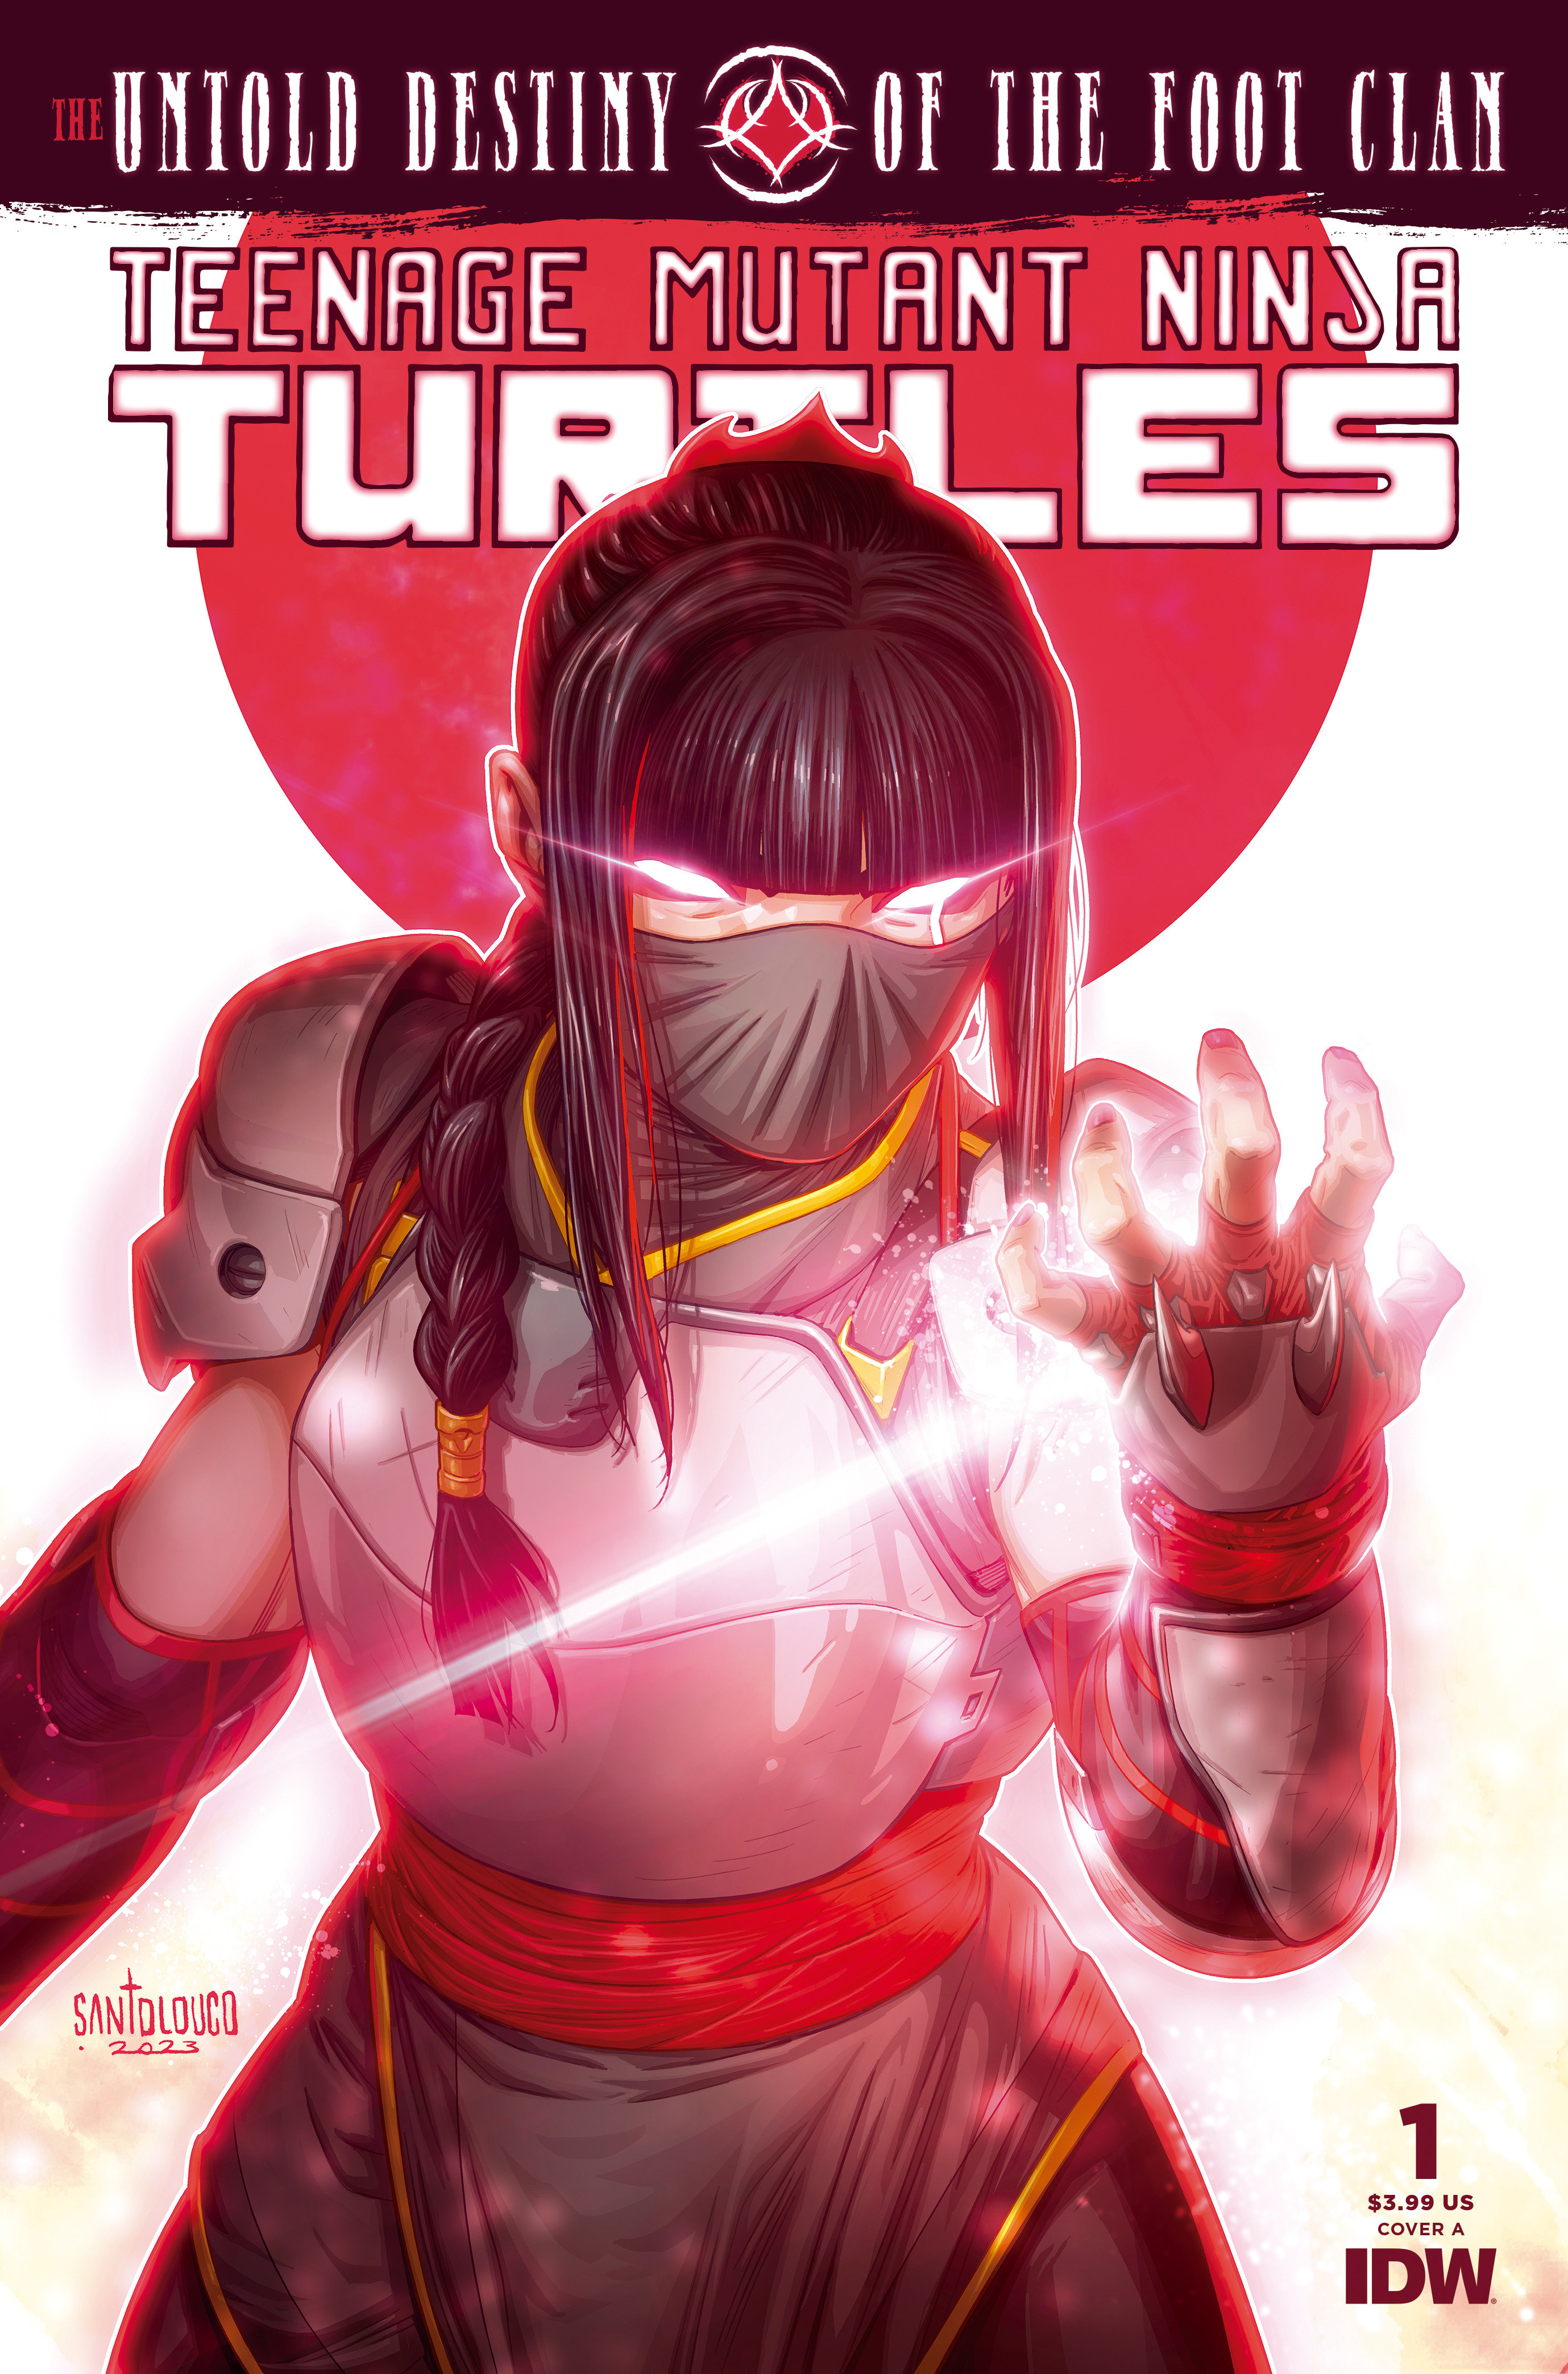 Teenage Mutant Ninja Turtles: The Untold Destiny of the Foot Clan #1 Cover A Santolouco